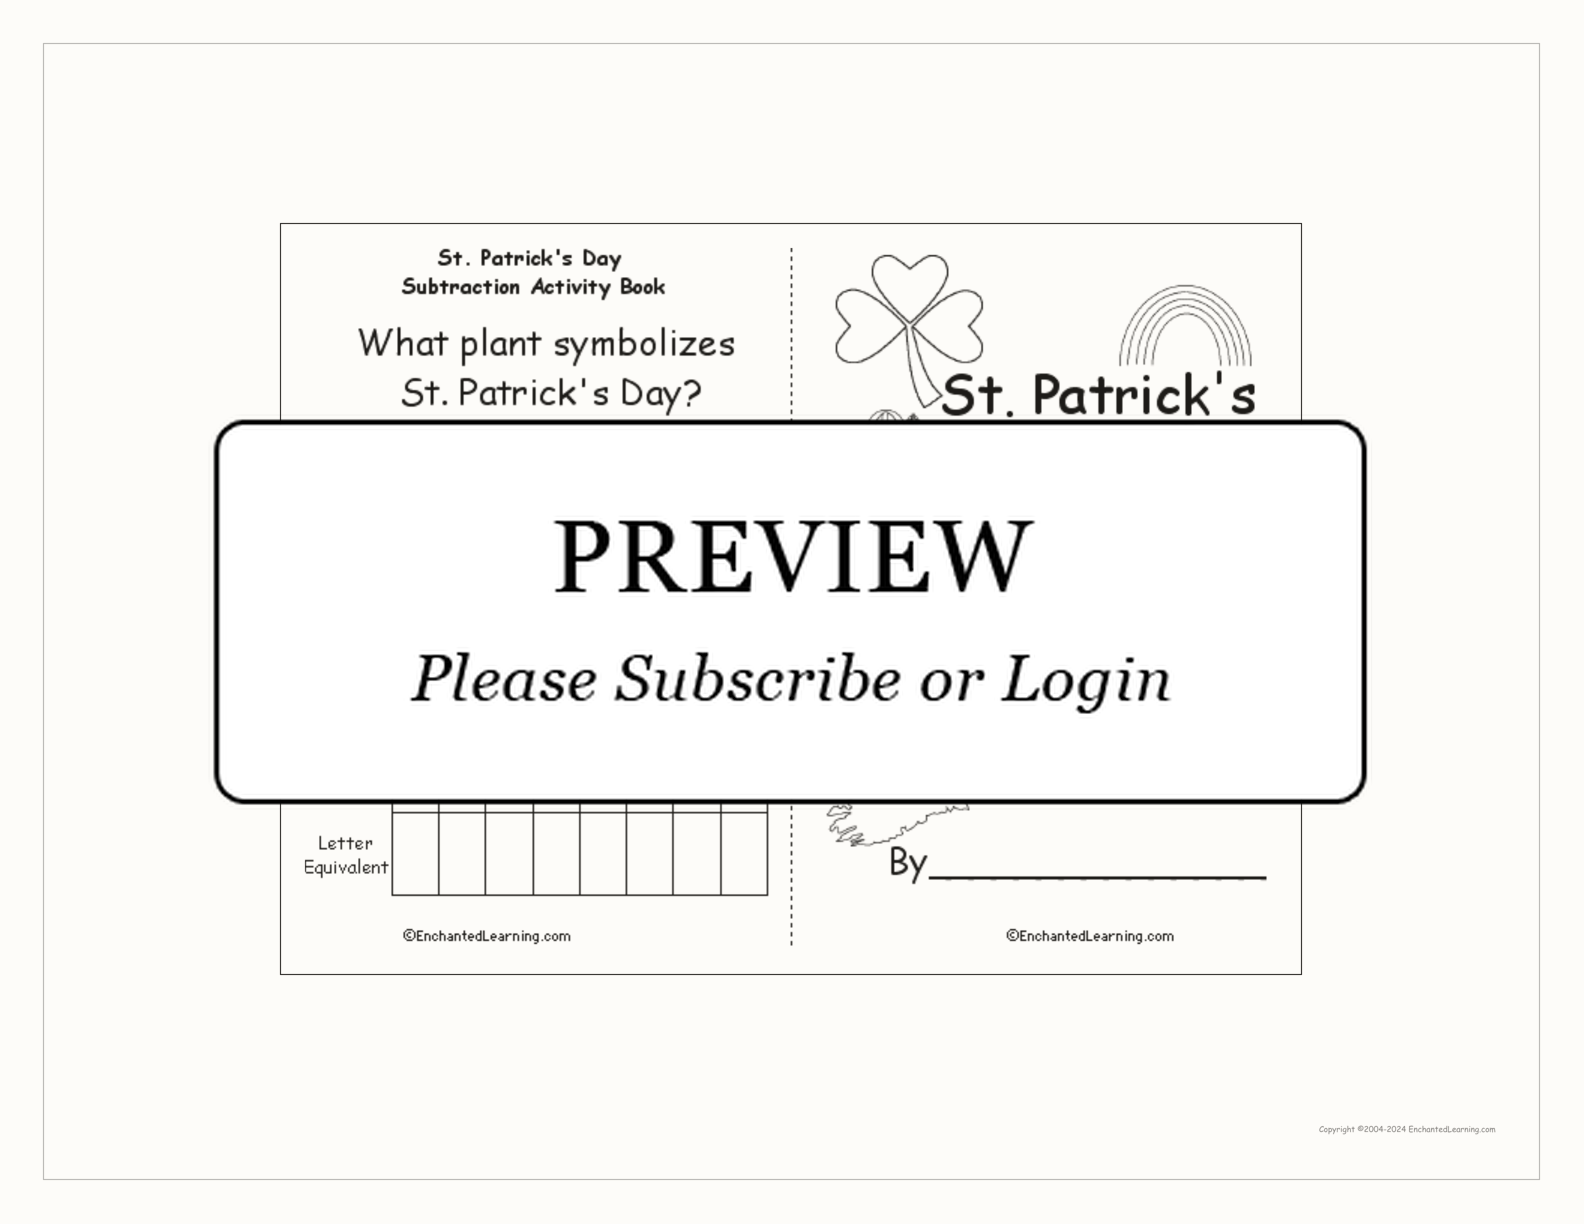 St. Patrick's Day Subtraction Book interactive worksheet page 1